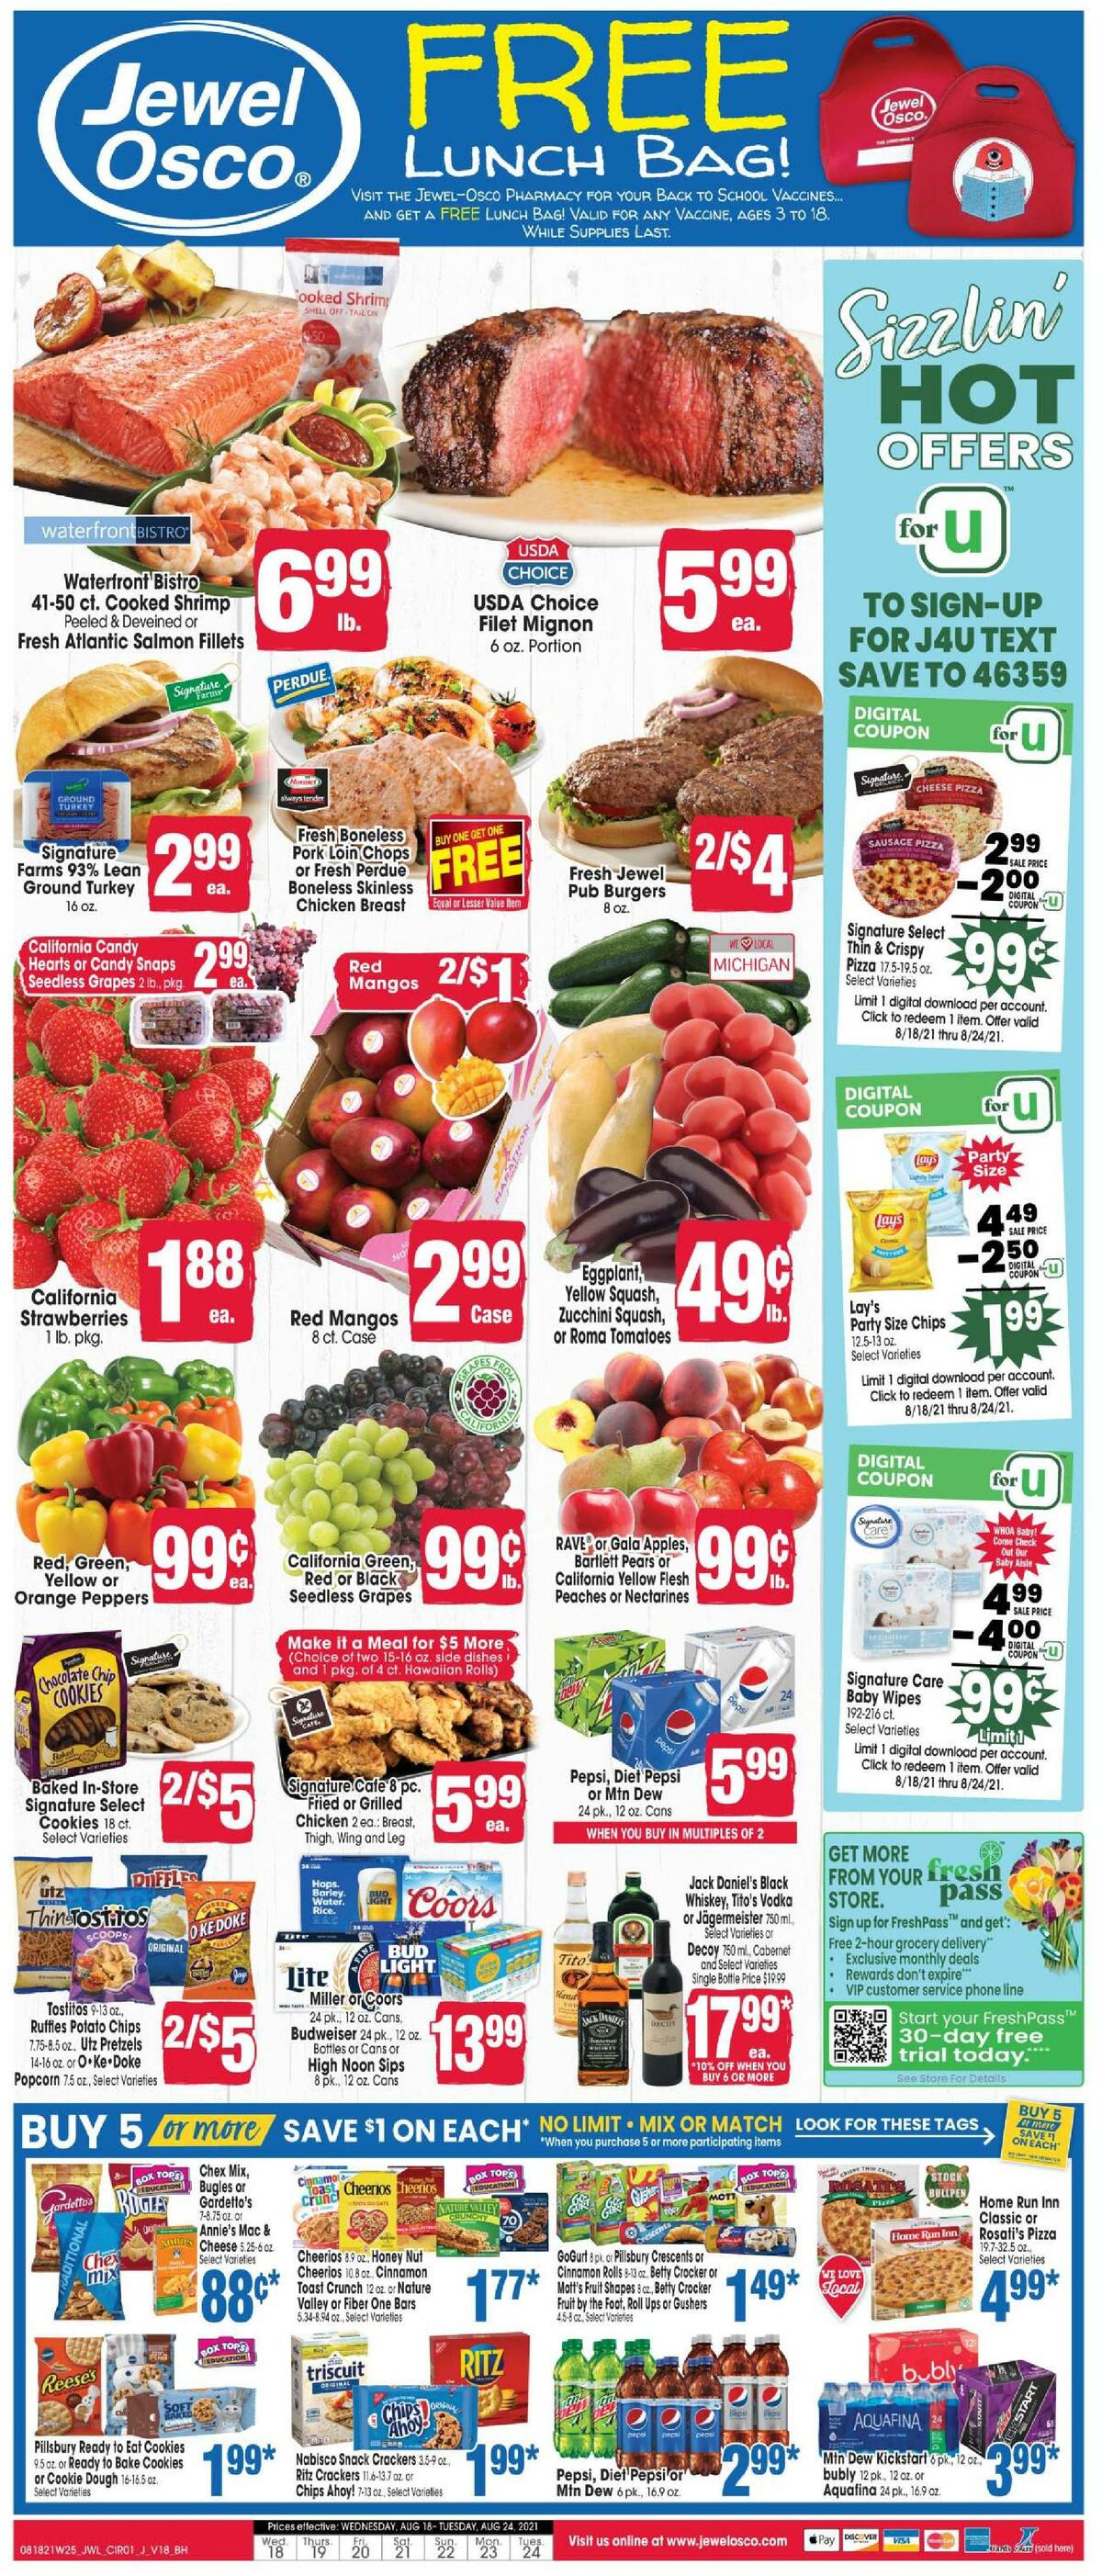 Jewel Osco Weekly Ad from August 18